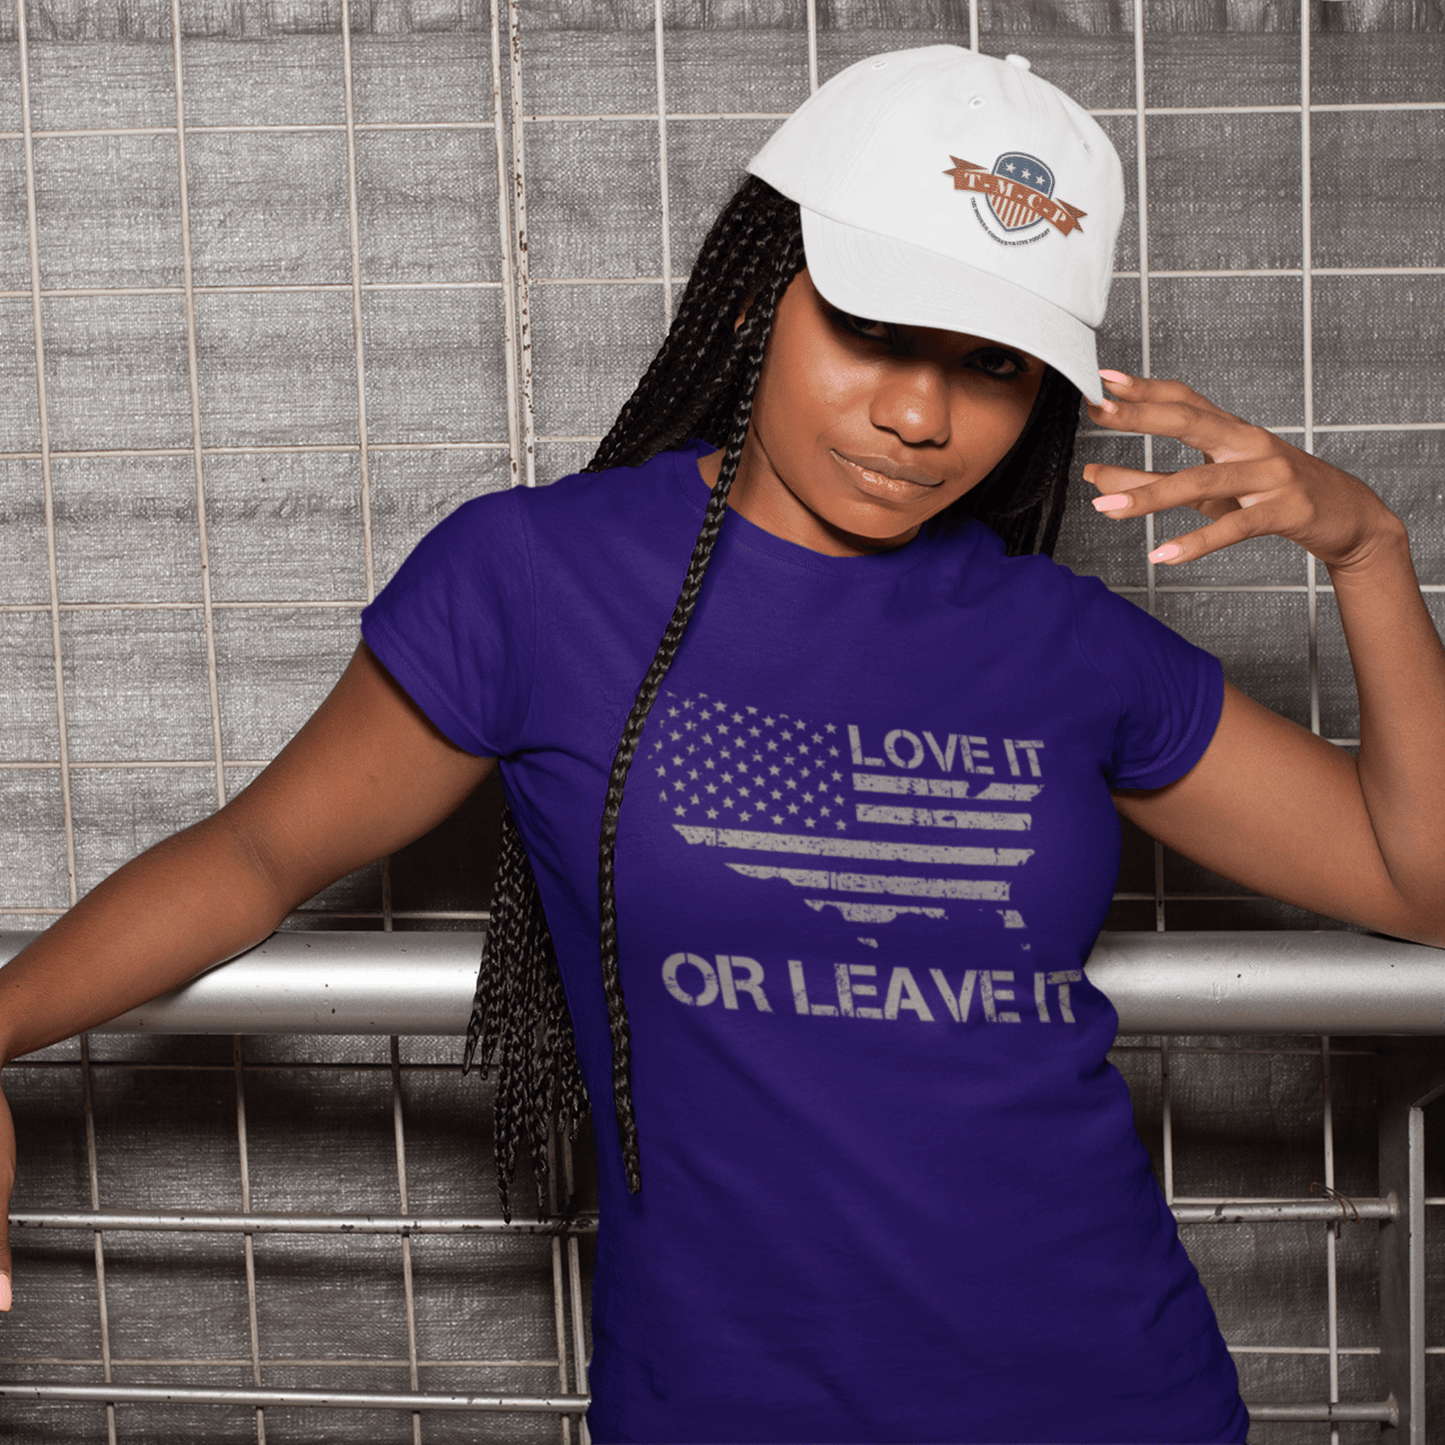 Love It Or Leave It Women's Short Sleeve T-Shirt with purple hat front